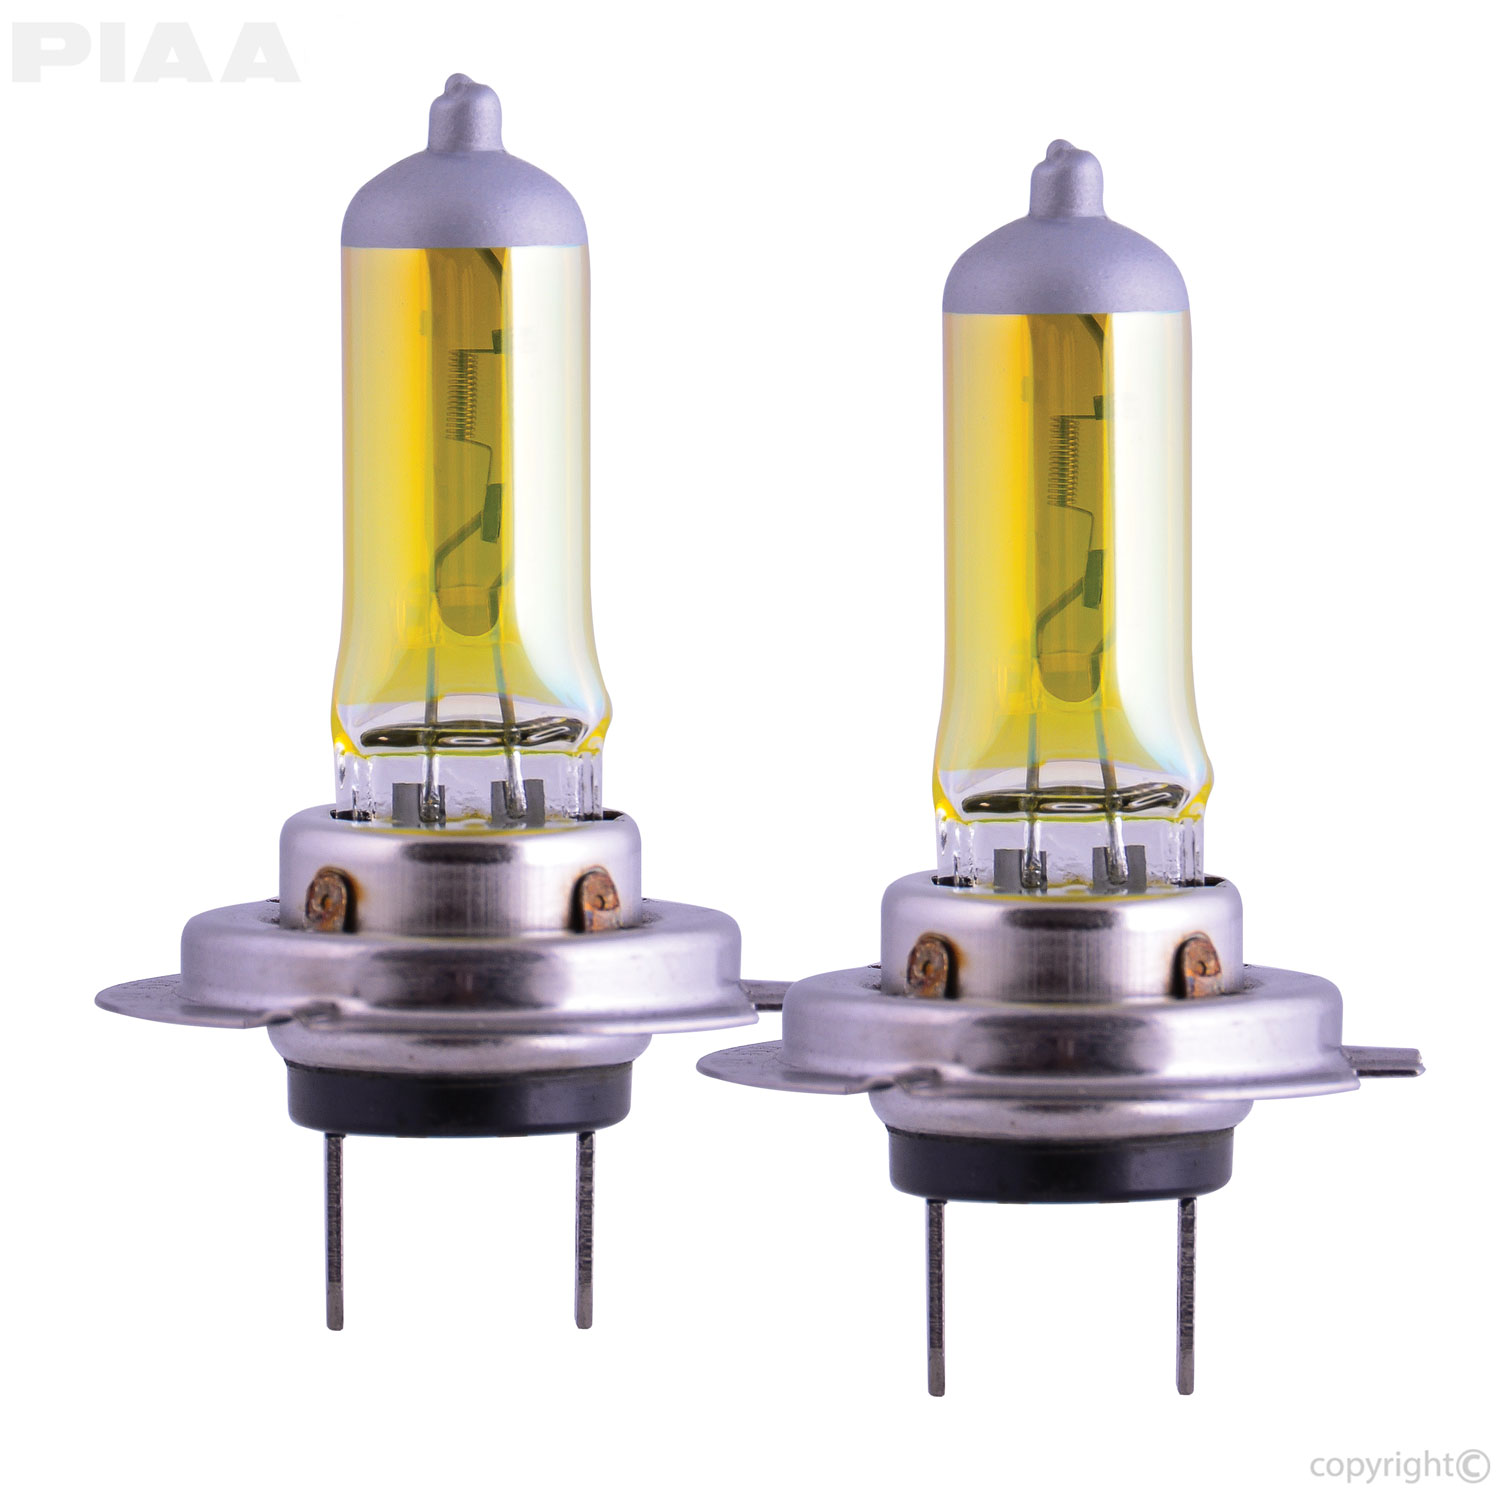 https://www.piaa.com/resize/Shared/product-images/automotive-bulbs/piaa-22-13407-h7-solar-yellow-dual.jpg?bw=1000&w=1000&bh=1000&h=1000